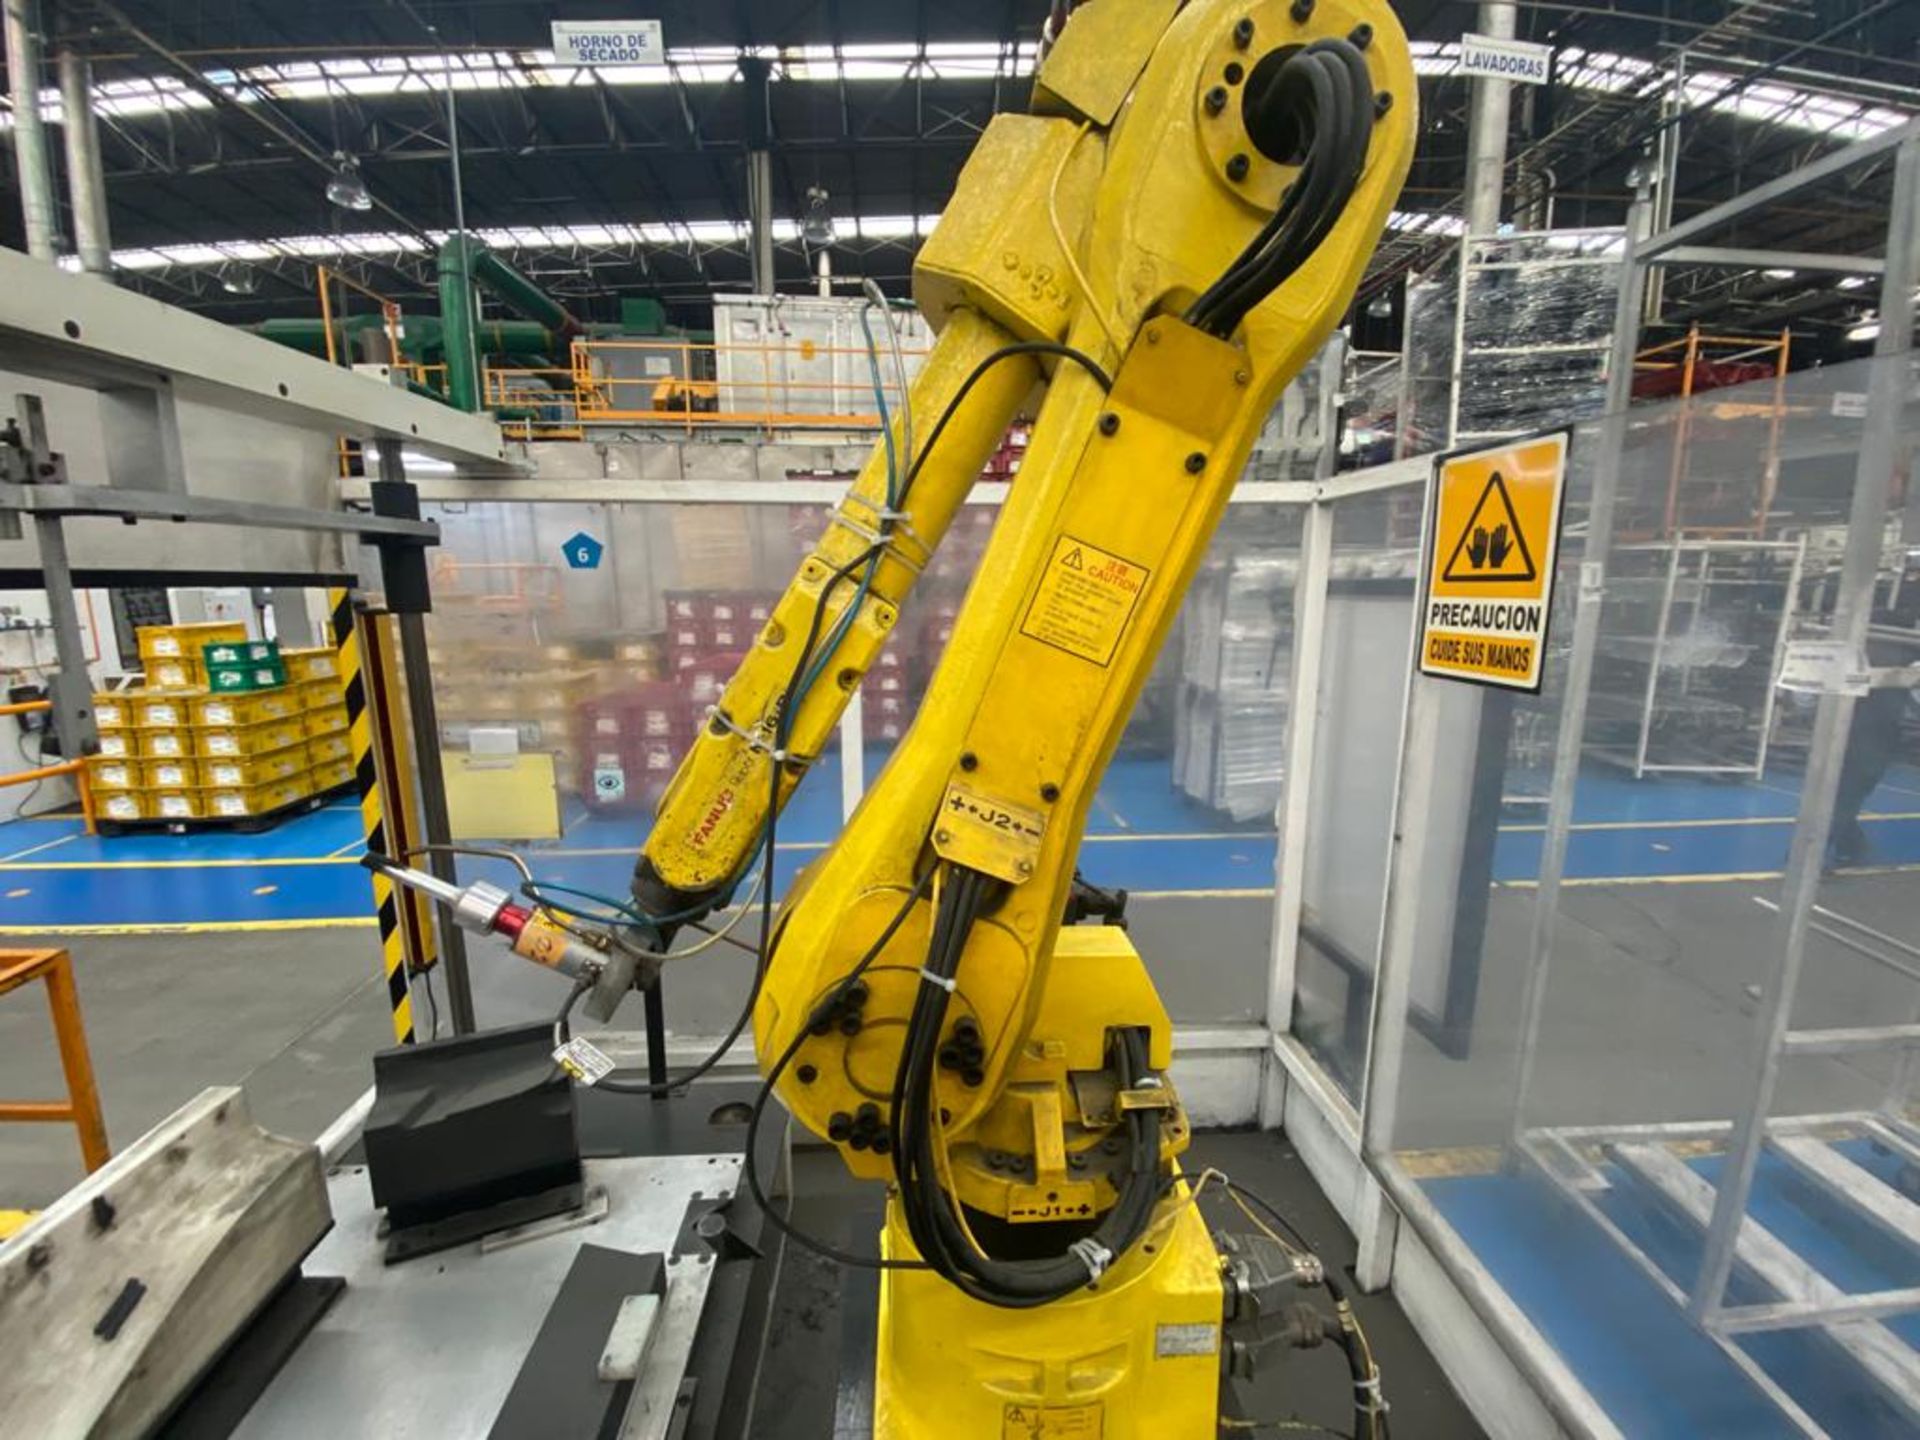 Welding cell in steel square profile structure, equipped with Fanuc articulated Robot, - Image 4 of 53